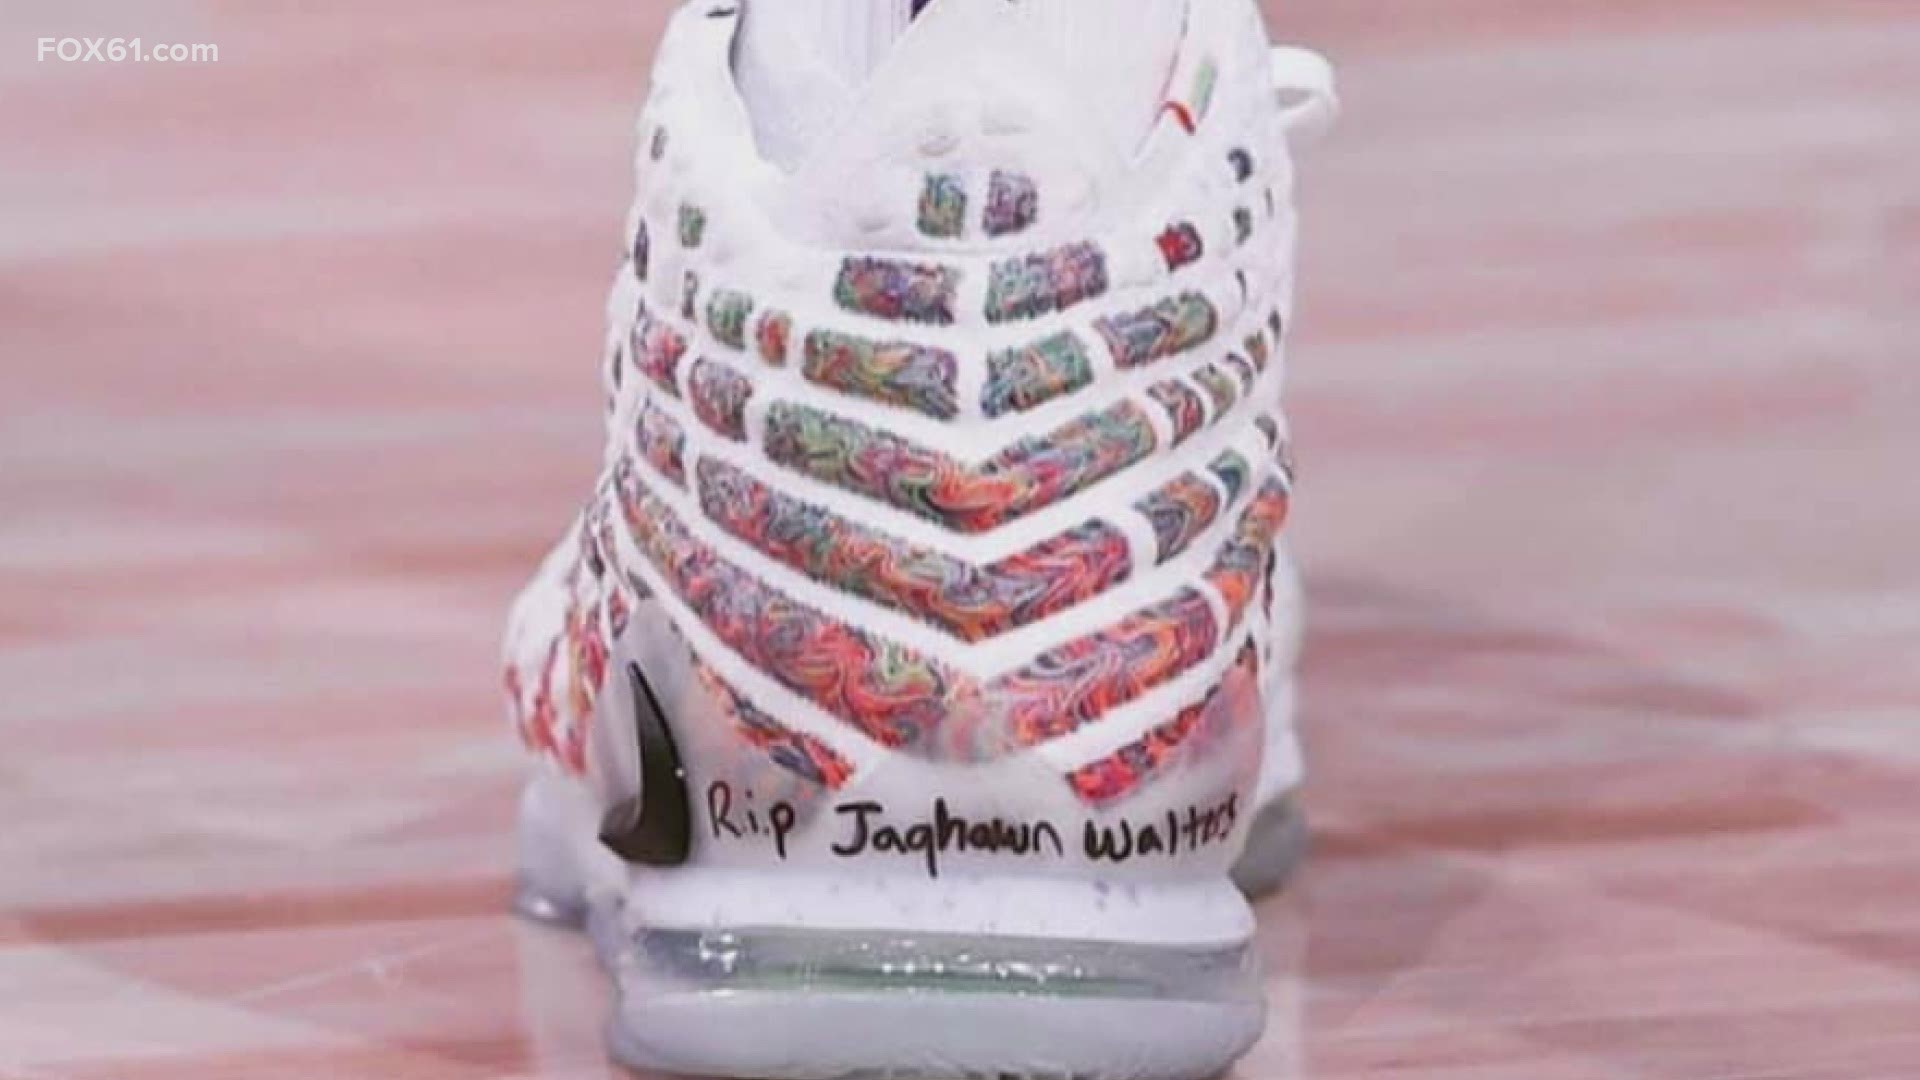 Markeiff Morris of the Lakers wrote “RIP Jaqhawn Walters” on the sneakers he wore in Game 4 of the Western Conference Finals.